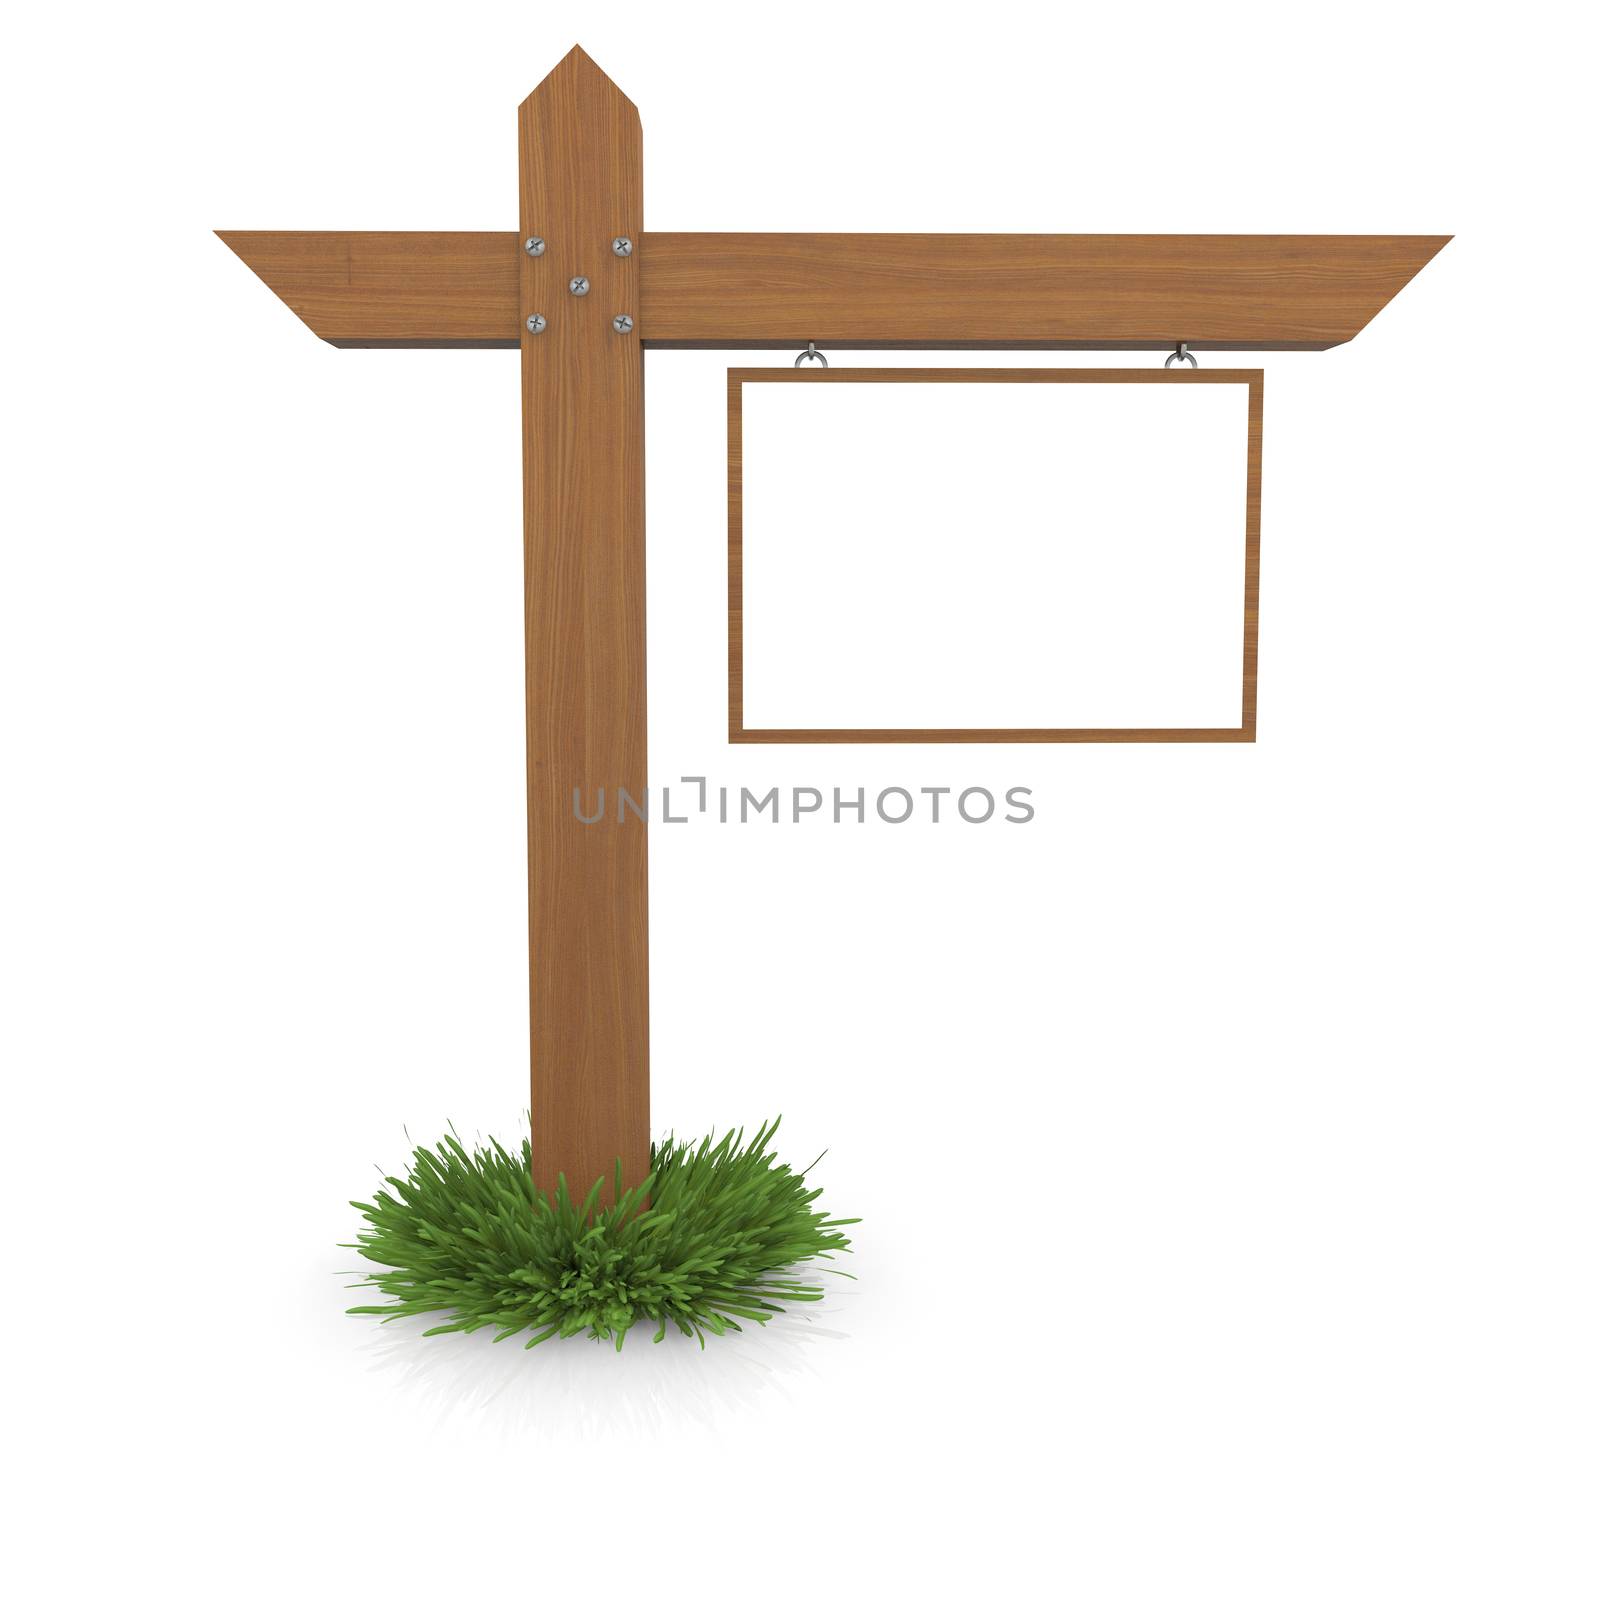 Wooden signboard in the grass. Isolated render on a white background